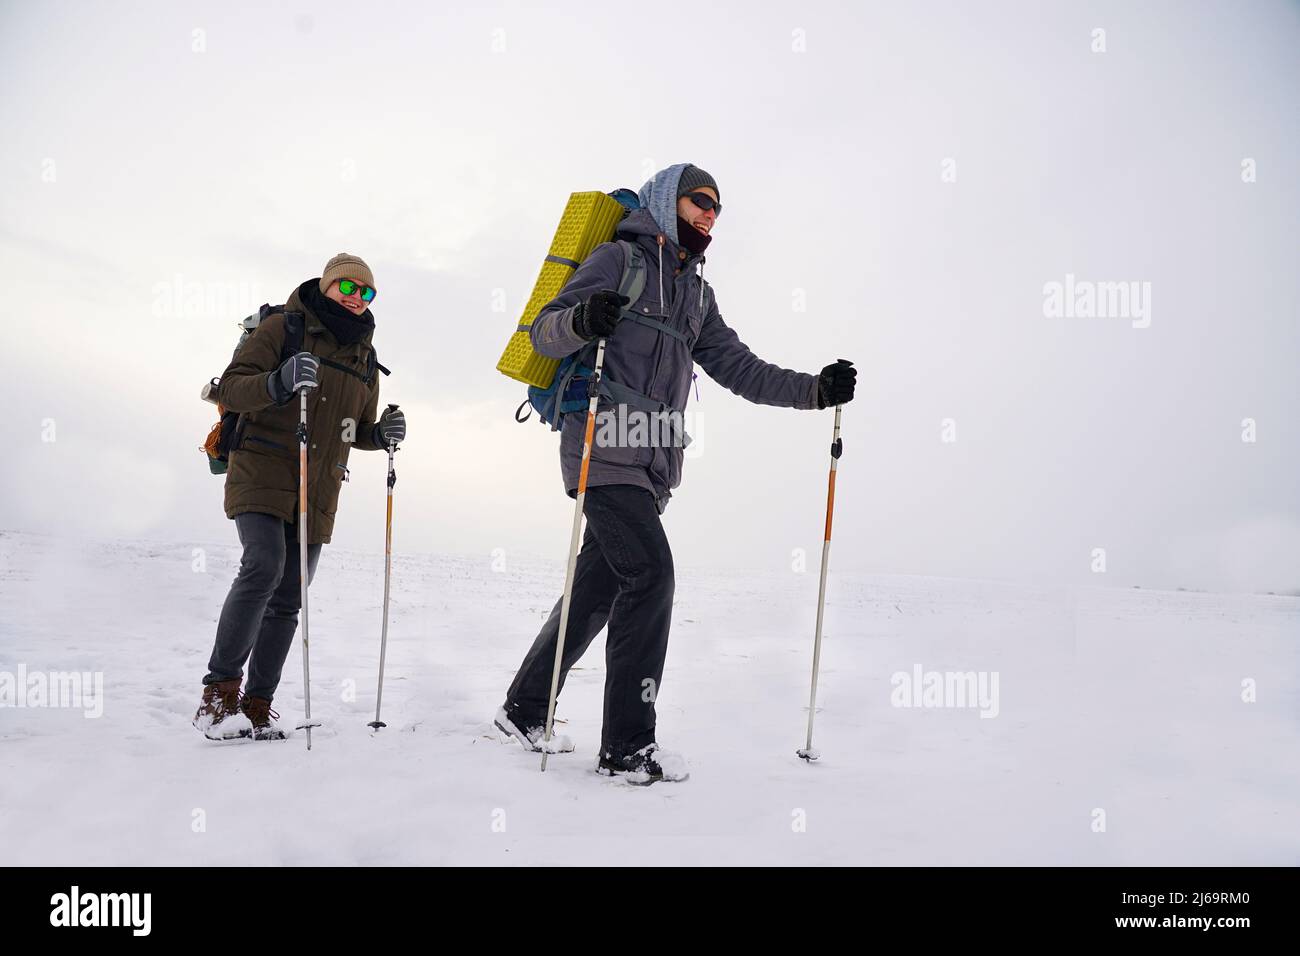 Men go after him during the polar winter expedition to the north. People in winter jackets with large backpacks. Winter climbing and expedition Stock Photo